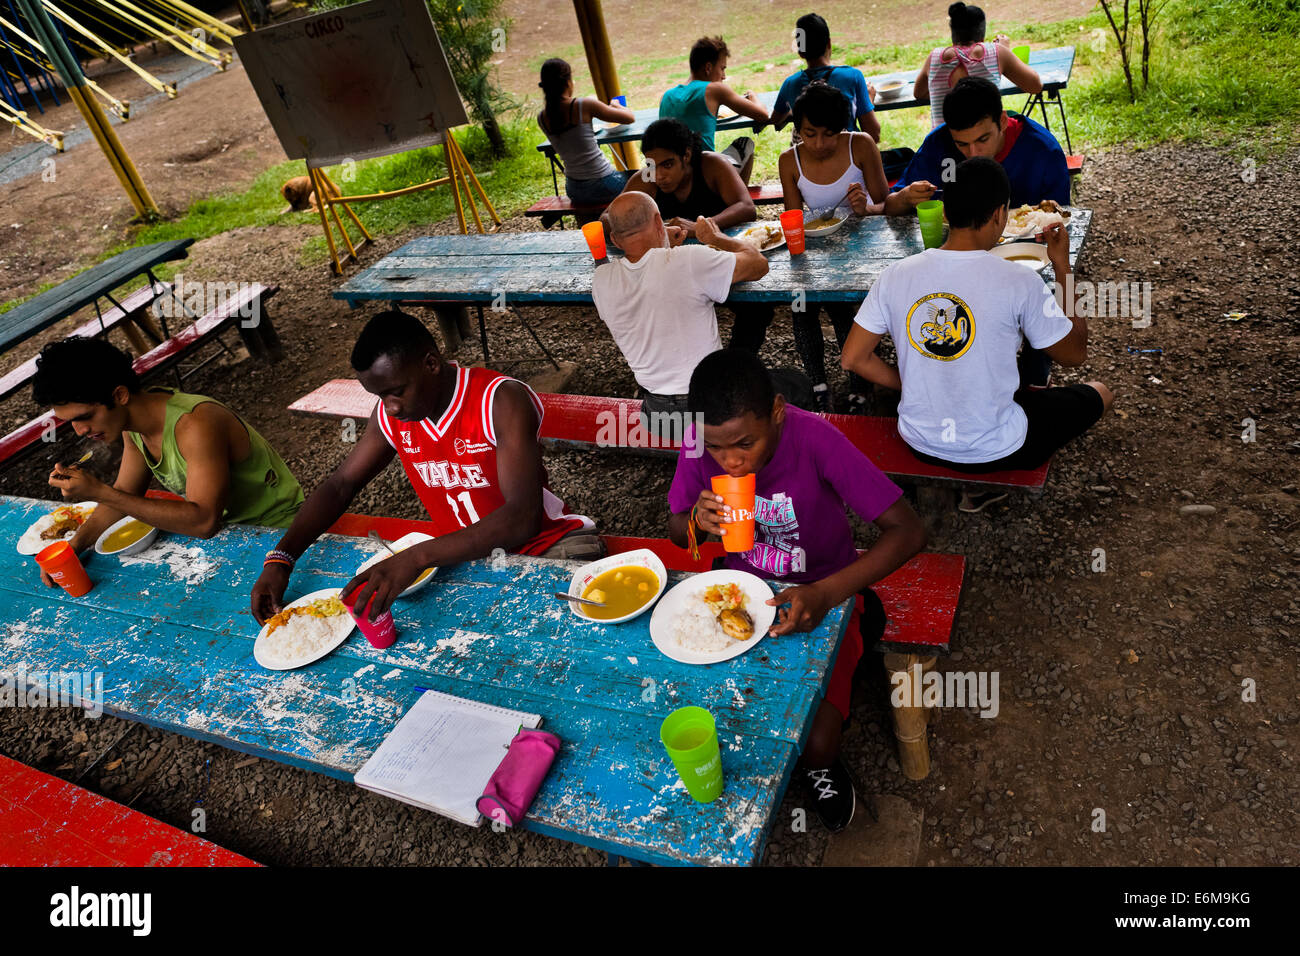 Students eat lunch in an open-air dinner of the circus school Circo para Todos in Cali, Colombia. Stock Photo